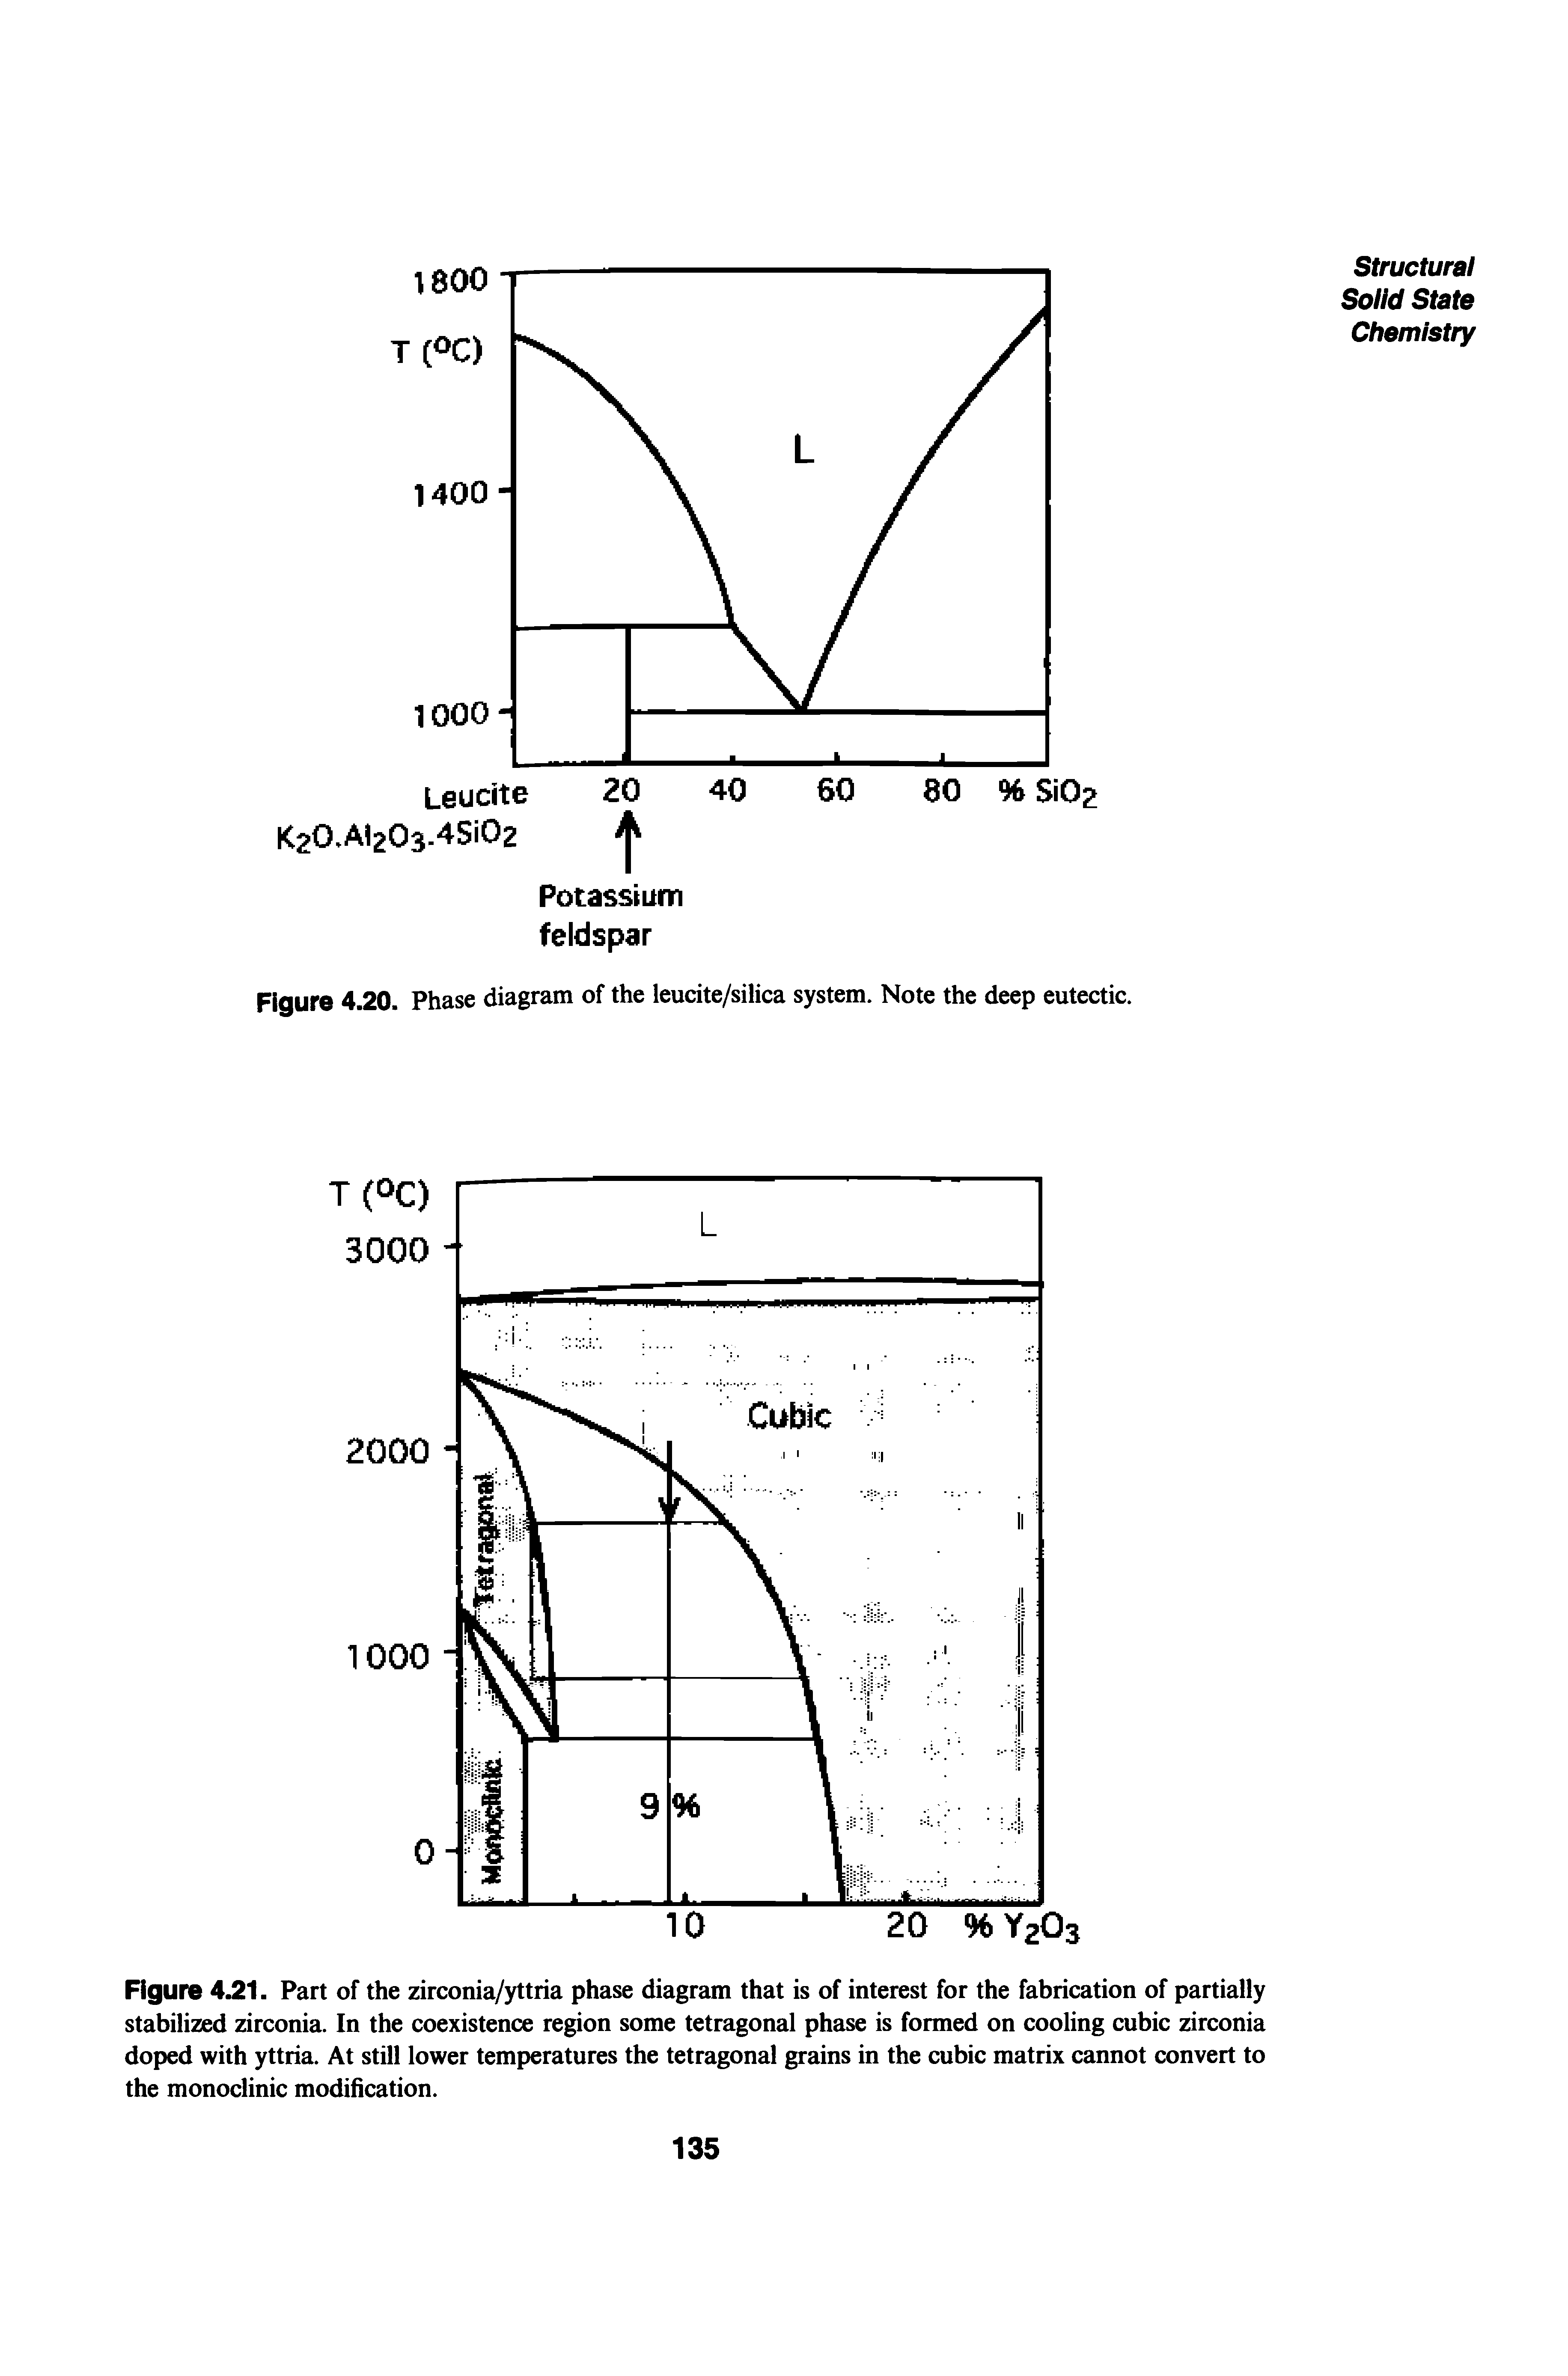 Figure 4.21. Part of the zirconia/yttria phase diagram that is of interest for the fabrication of partially stabilized zirconia. In the coexistence region some tetragonal phase is formed on cooling cubic zirconia doped with yttria. At still lower temperatures the tetragonal grains in the cubic matrix cannot convert to the monoclinic modification.